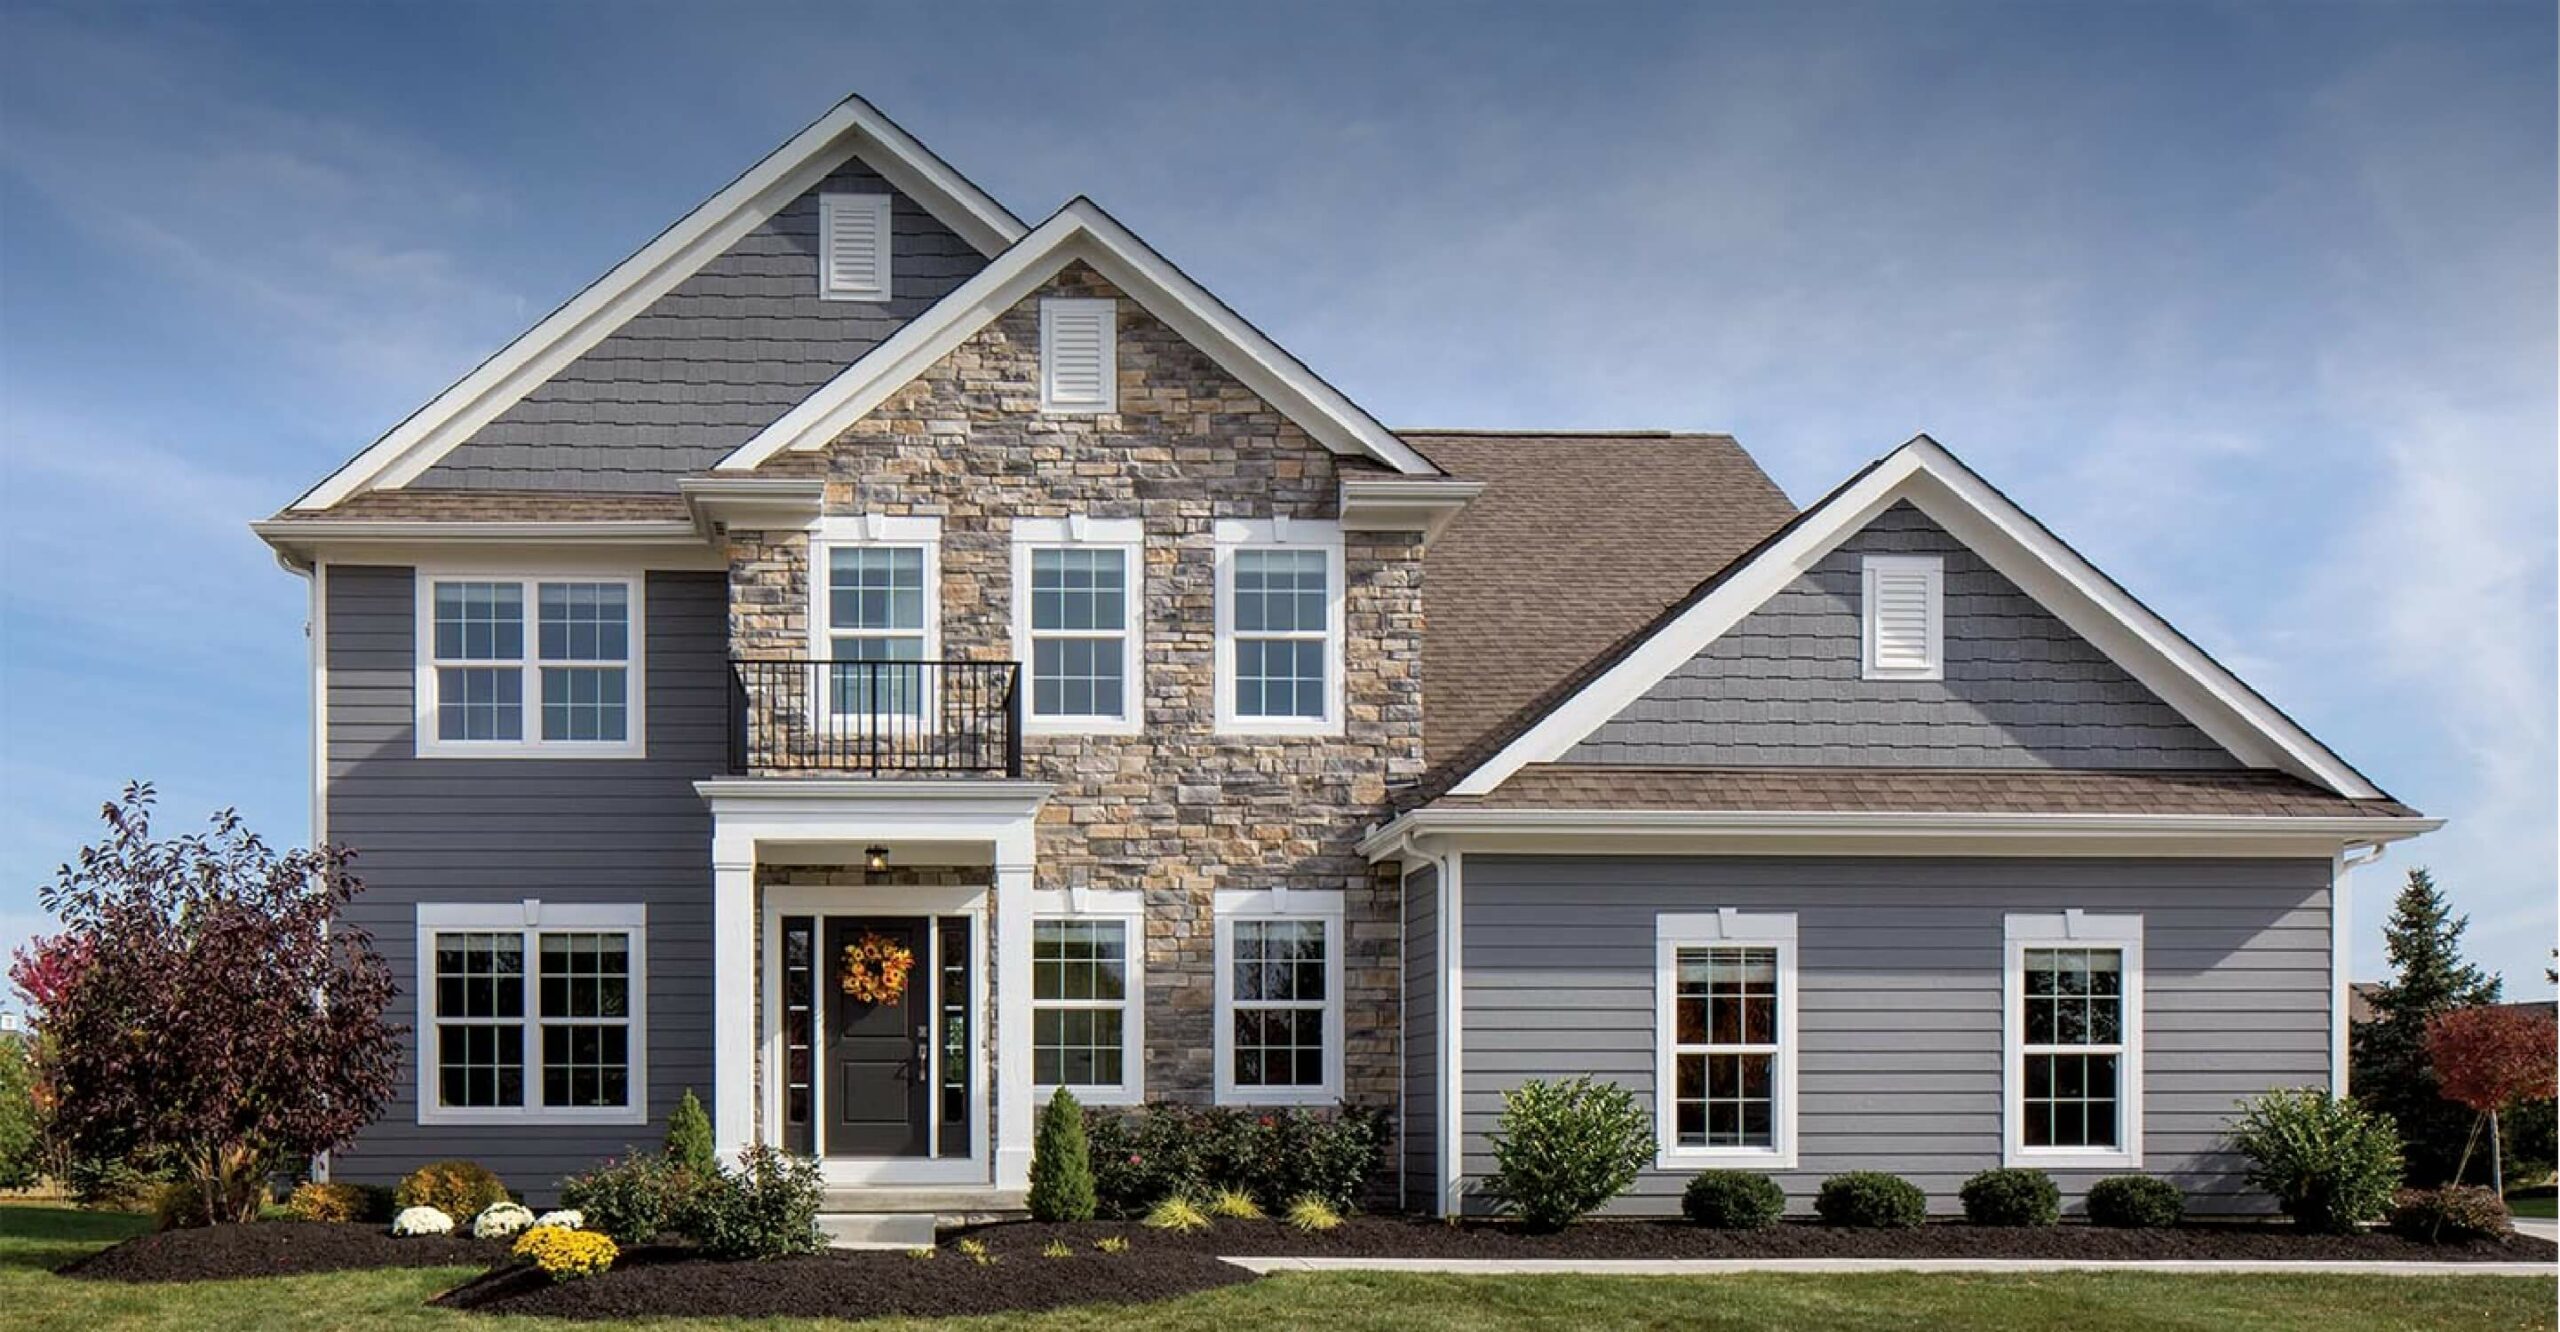 6 Siding Products That Add Texture, Color, and Variety